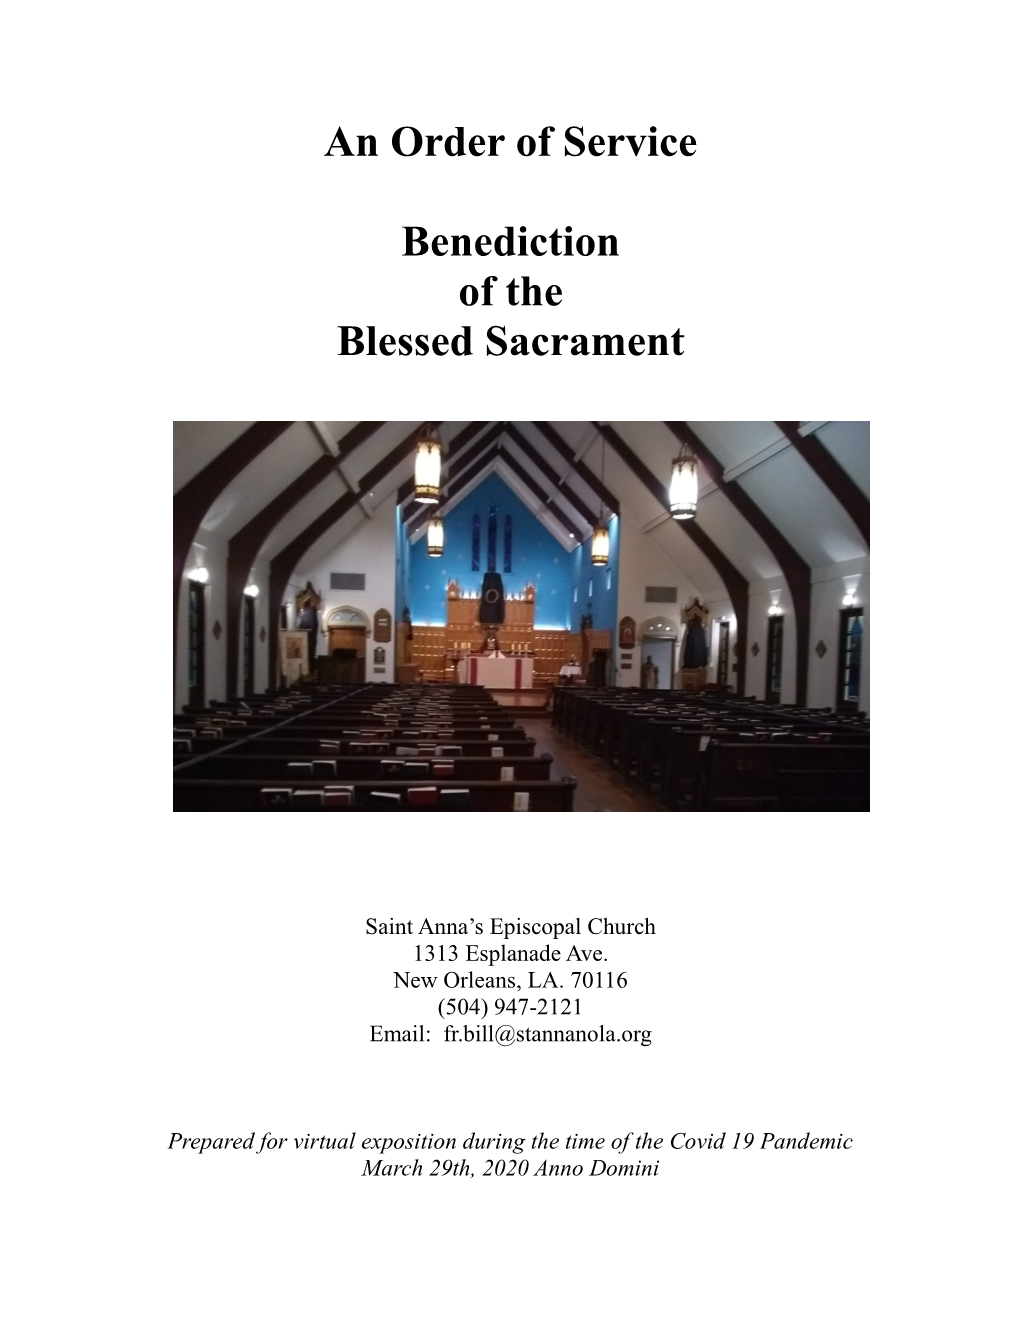 An Order of Service Benediction of the Blessed Sacrament